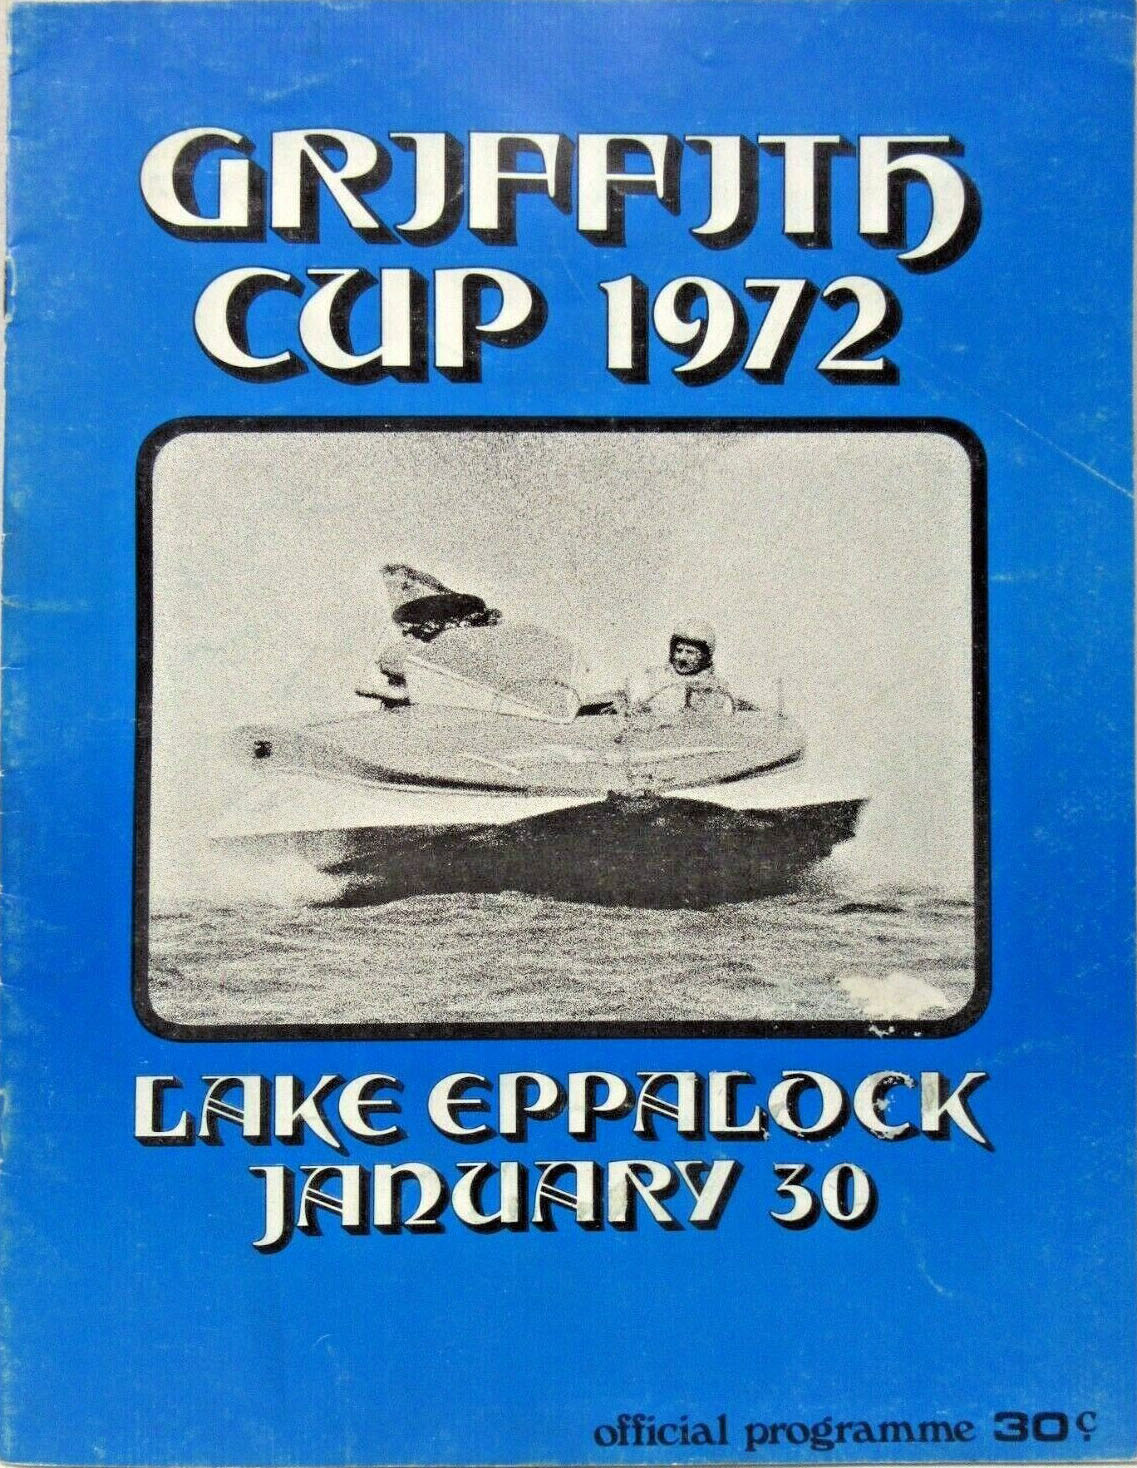 Hydroplane Racing Program: 1972 Griffith Cup